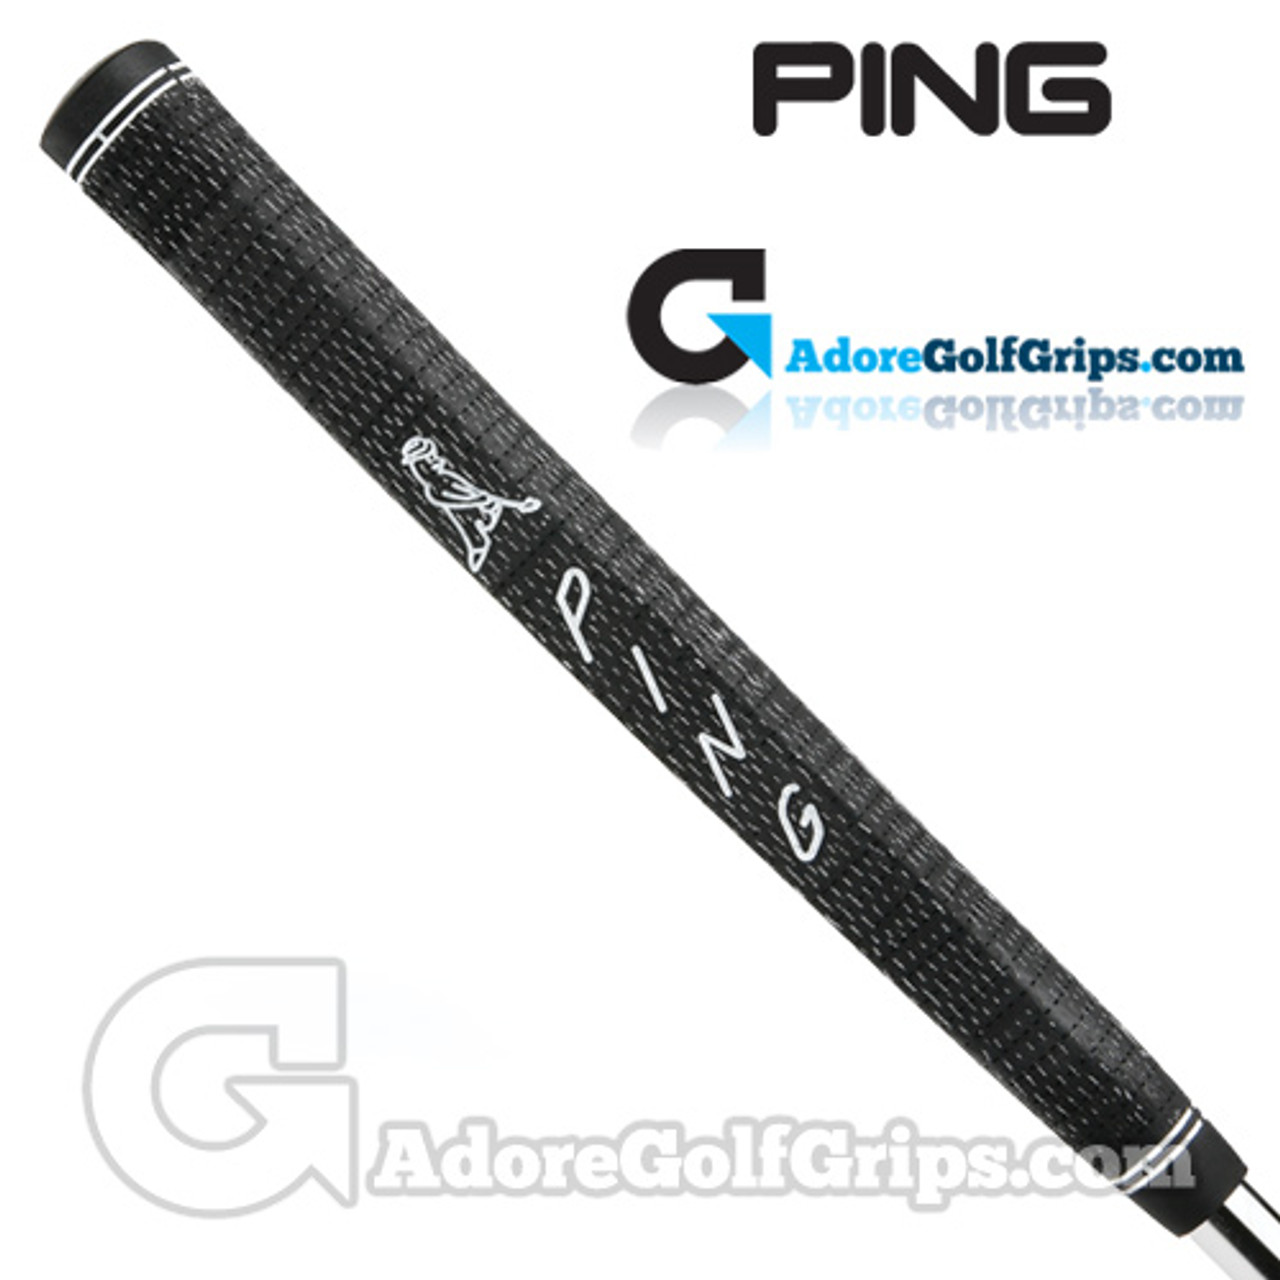 Ping PP58 Midsize Full Cord Classic Putter Grip - Grey - AdoreGolfGrips.com